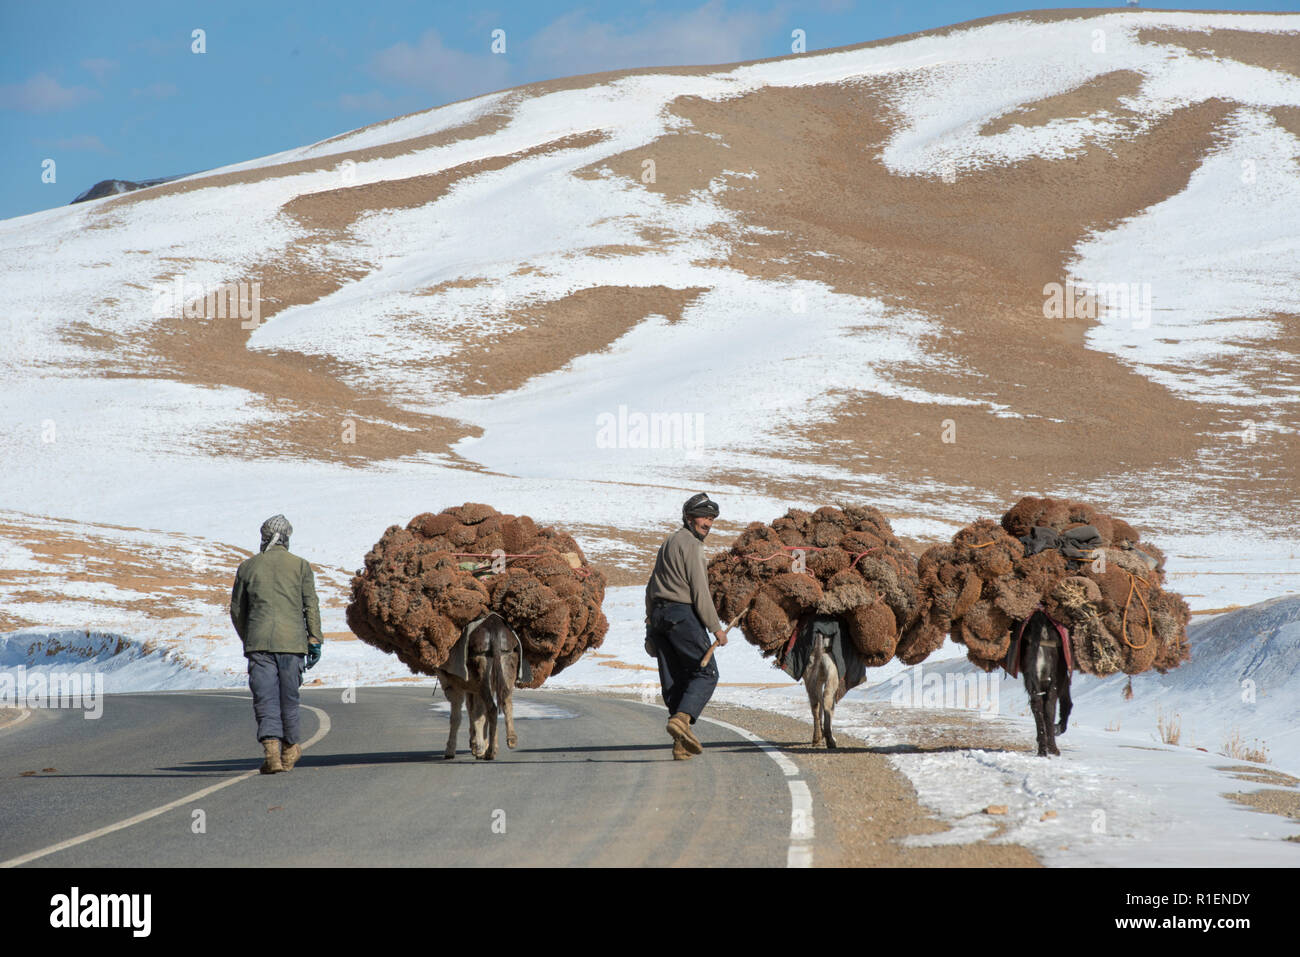 Two Farmers With Donkeys Bringing Back To Their Village Dried Grass To Feed Their Cattle, Band-e Amir National Park, Bamyan Province, Afghanistan Stock Photo